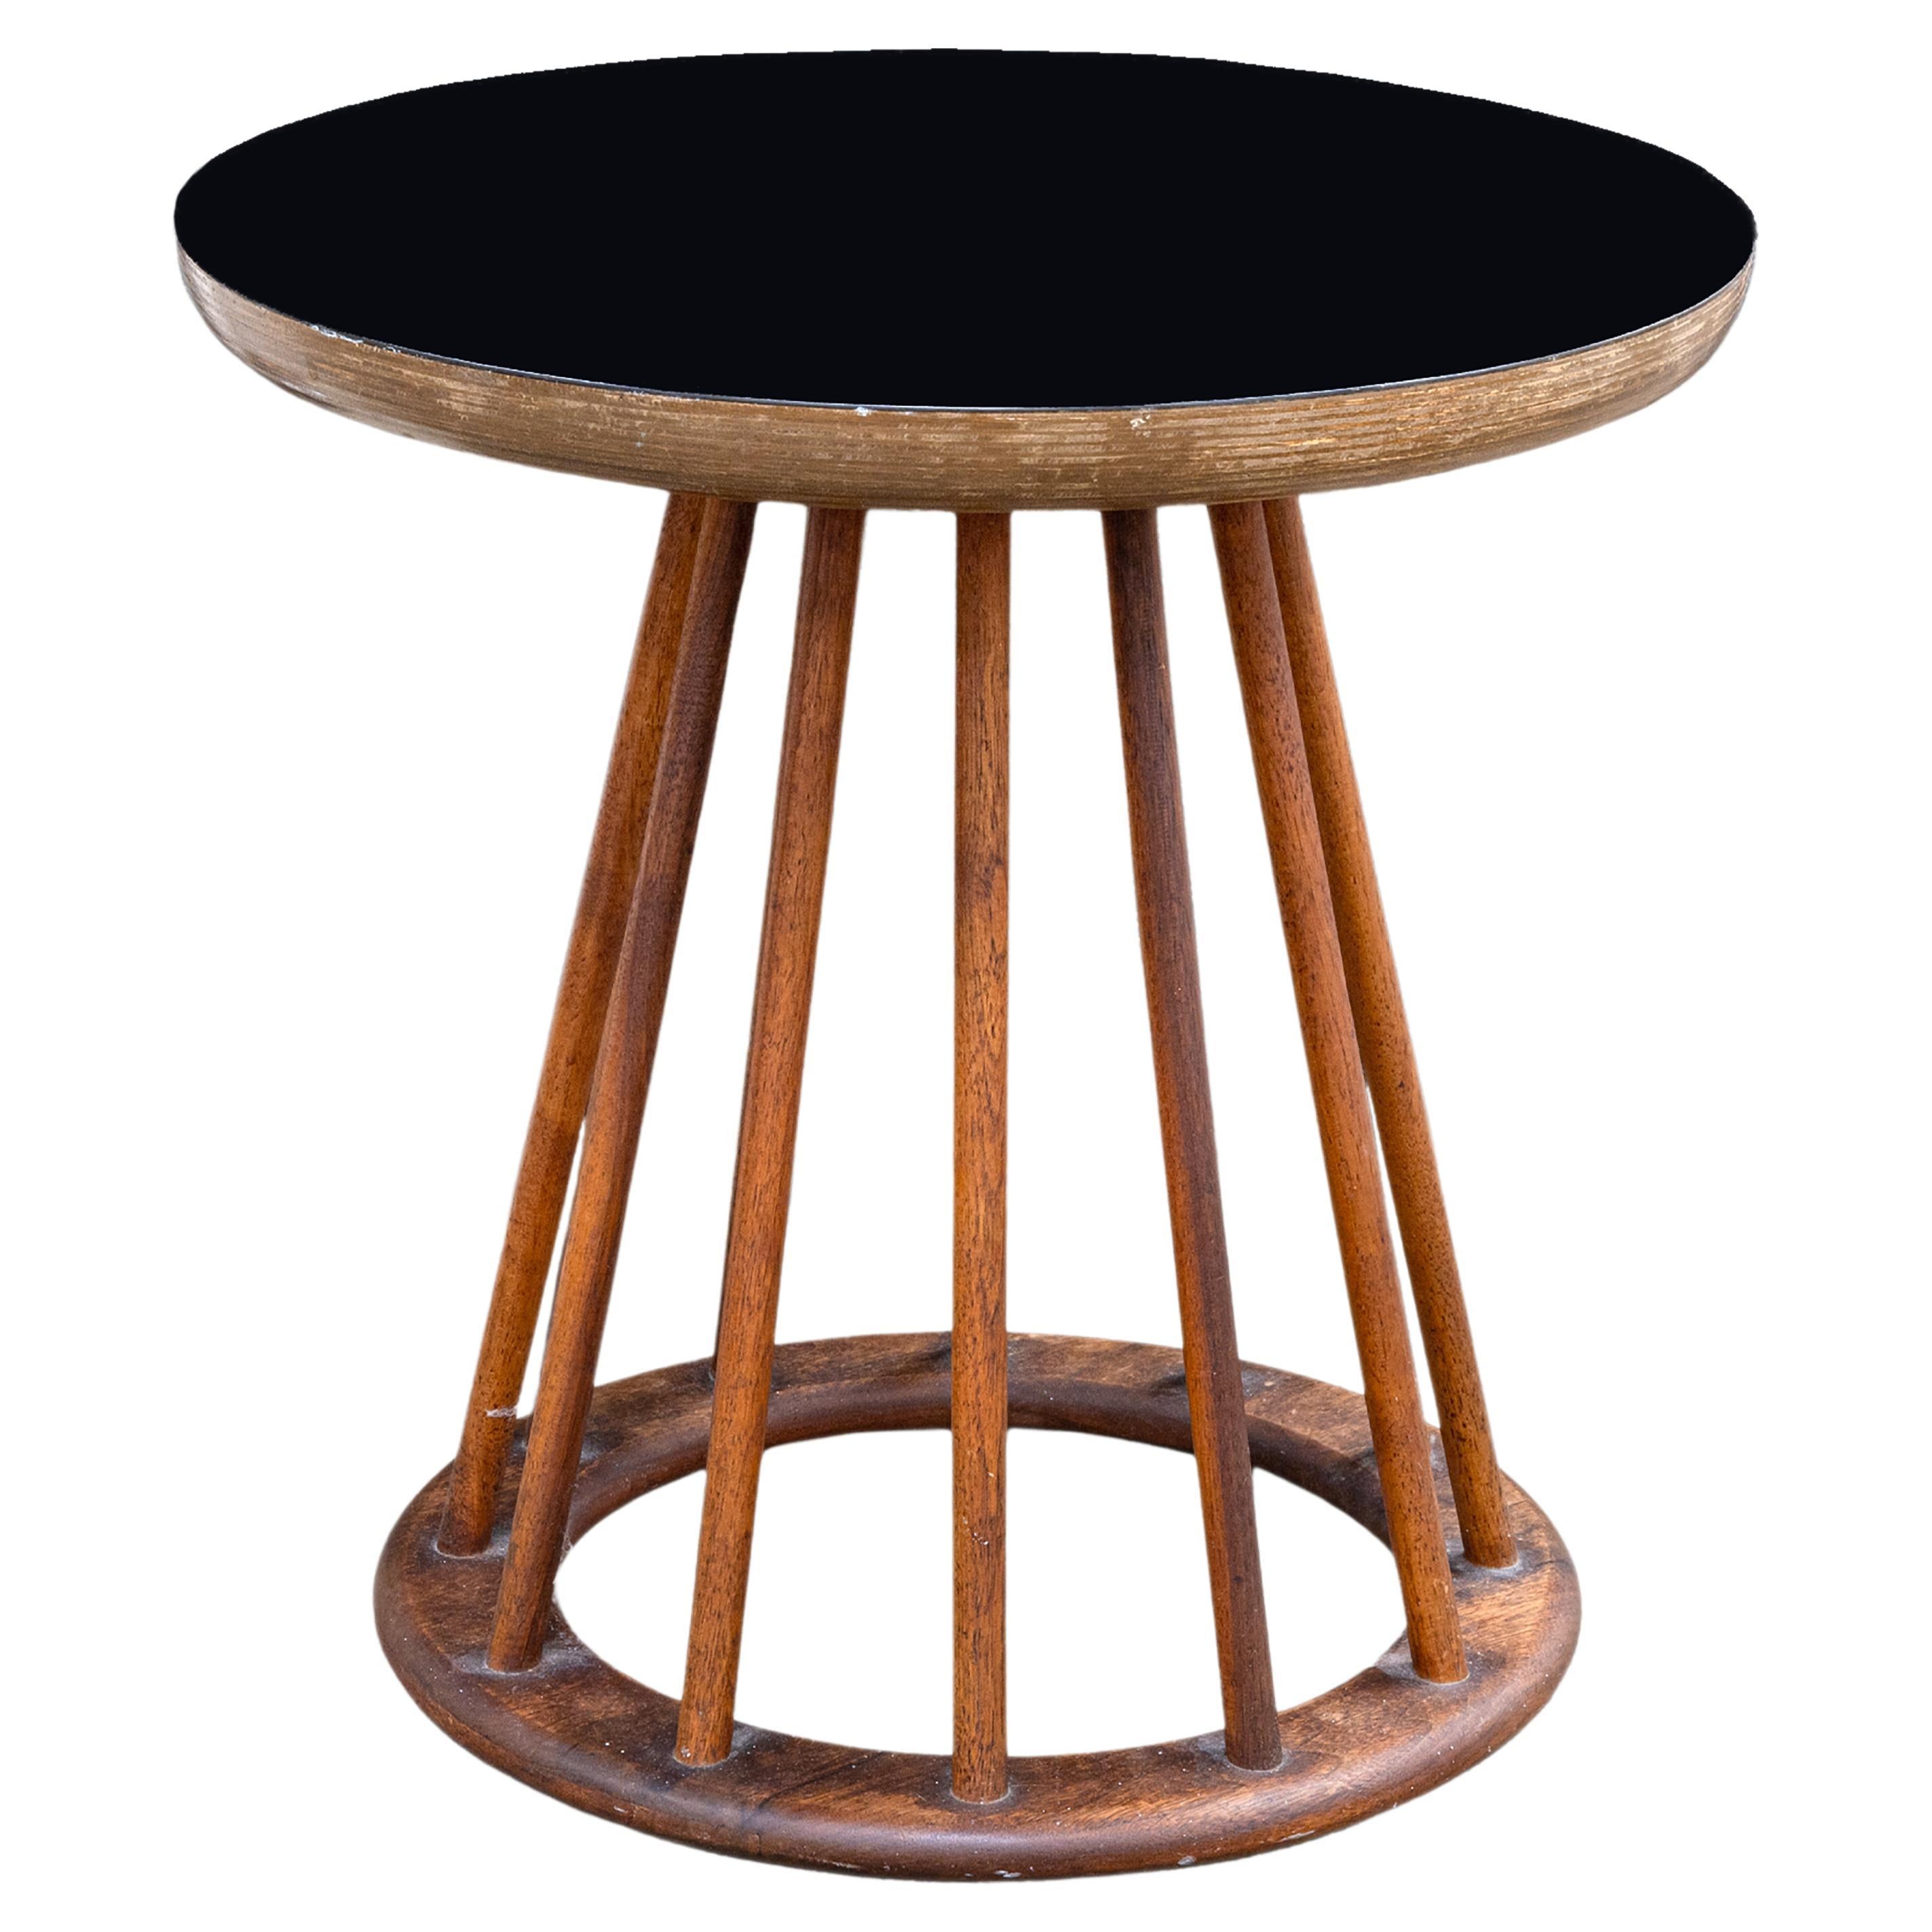 Arthur Umanoff Mid Century Modern Black Top Wooden Spindle Side End Table